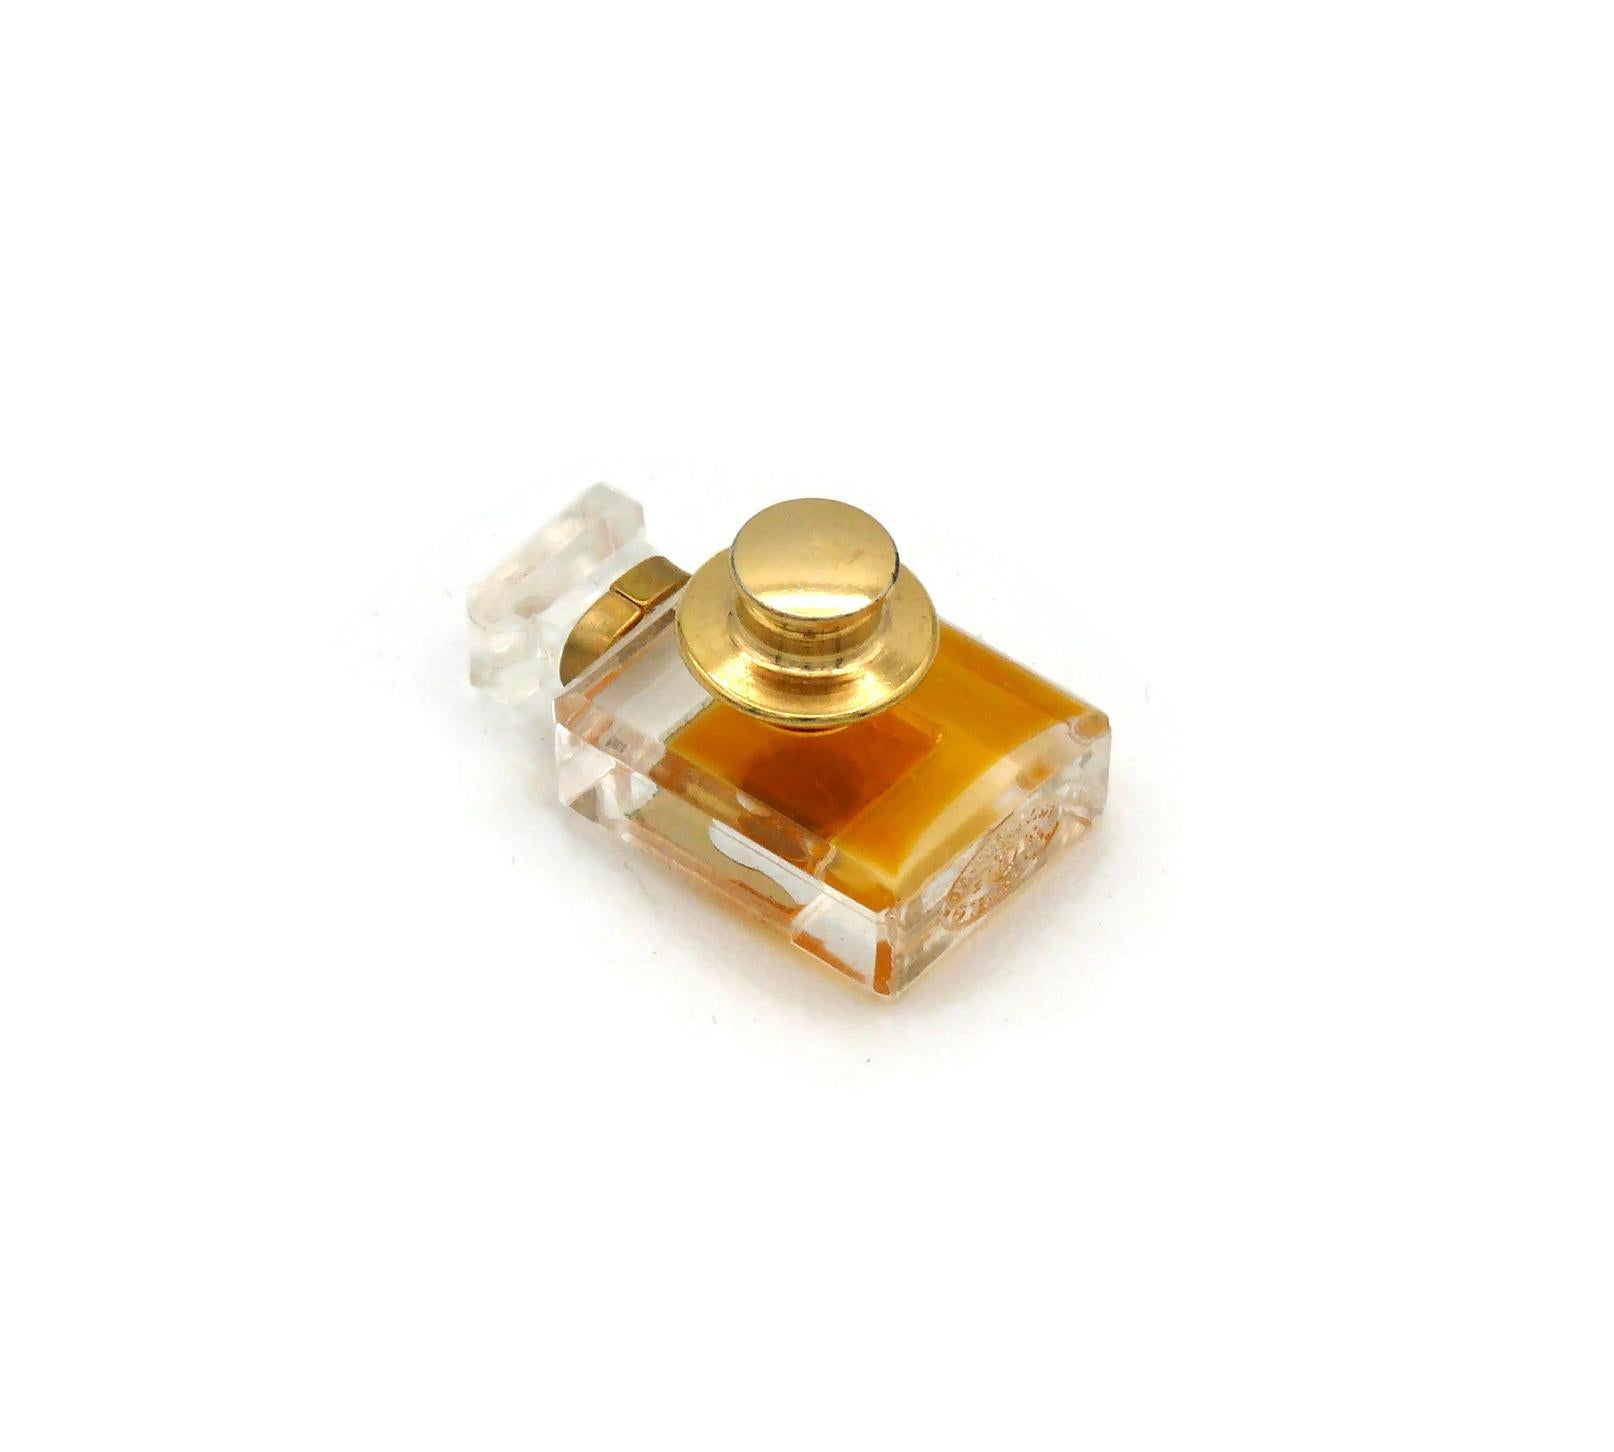 CHANEL by KARL LAGERFELD Iconic No. 5 Perfume Bottle Pin Brooch, 2005 In Good Condition For Sale In Nice, FR